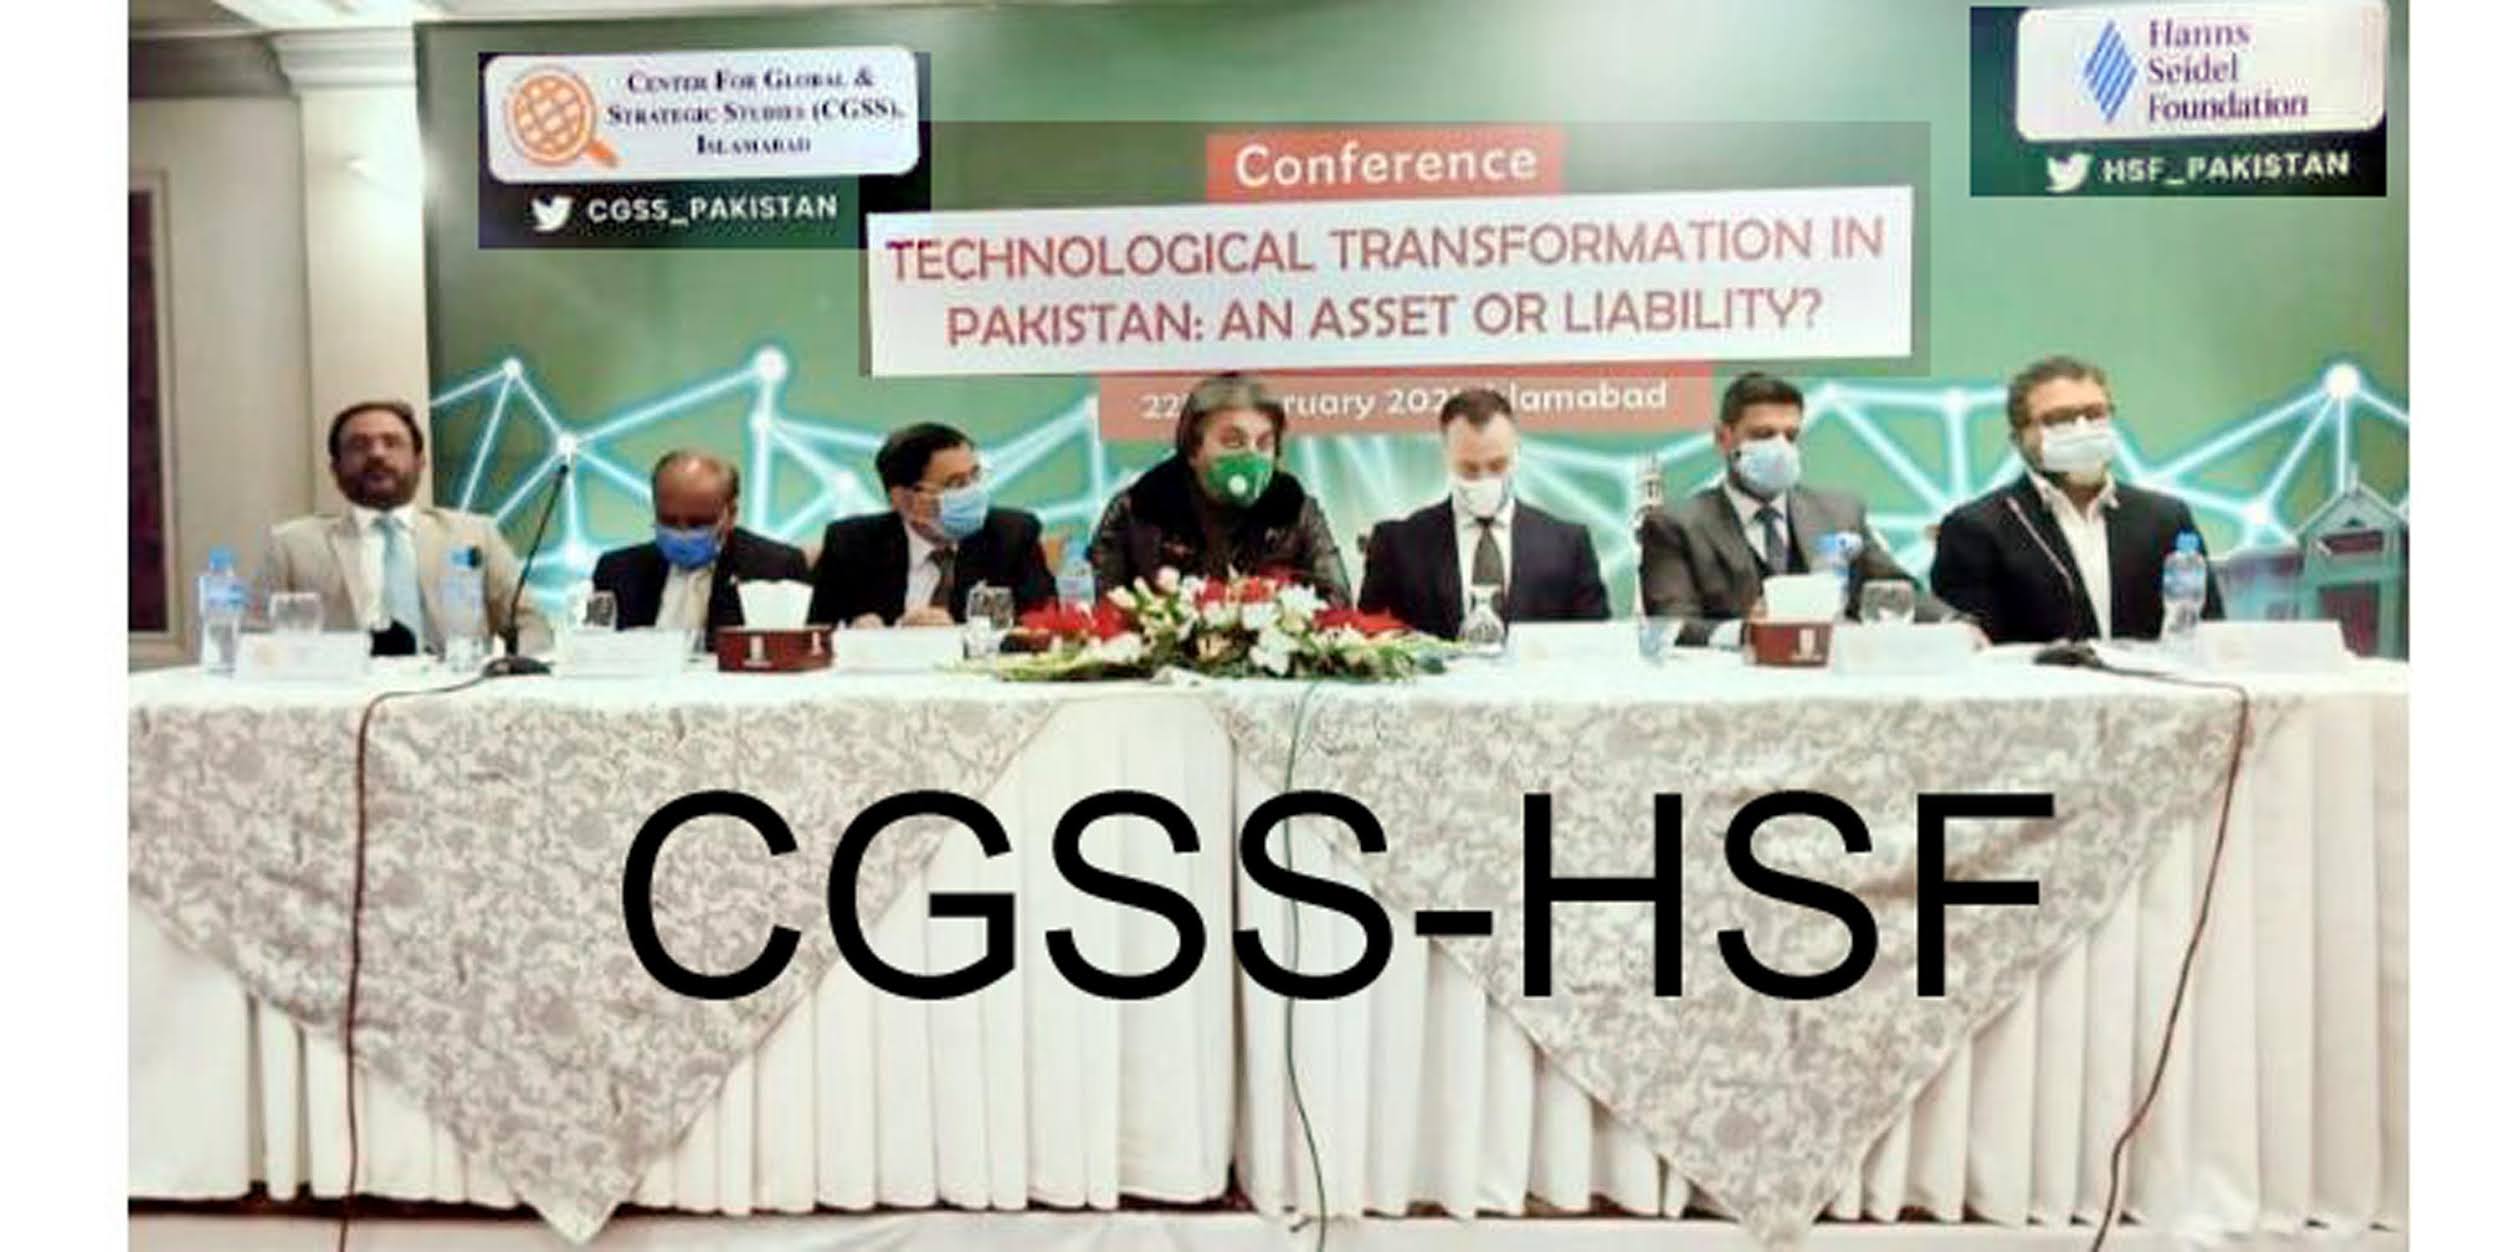 CGSS, HSF Organize Conference on “Technological Transformation in Pakistan: An Asset or Liability?”